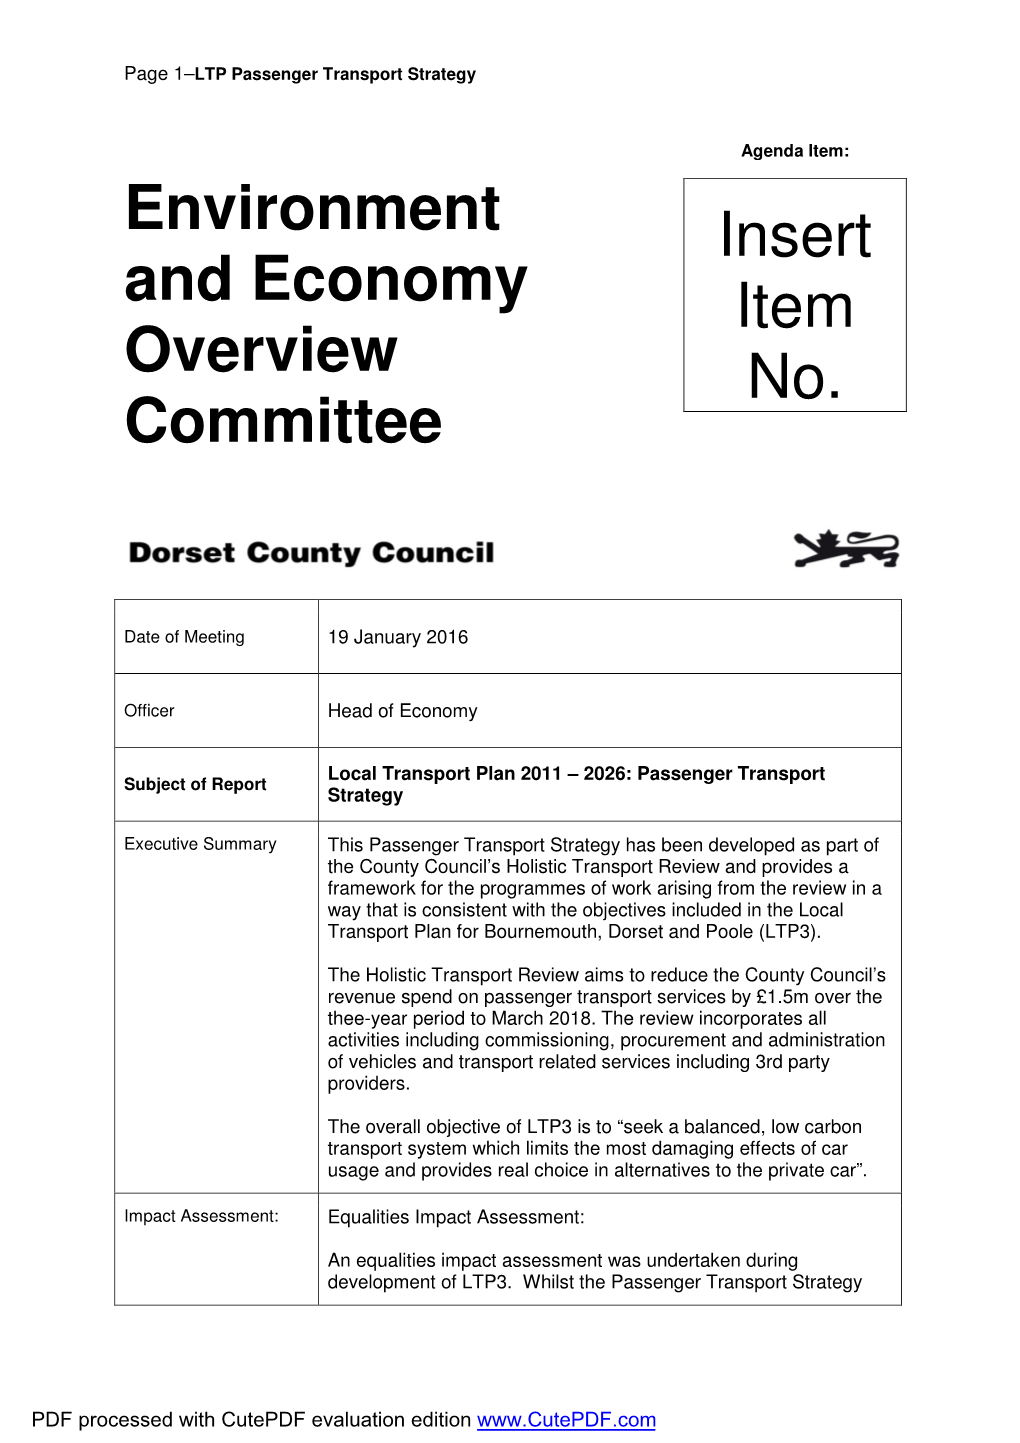 Environment and Economy Overview Committee Insert Item